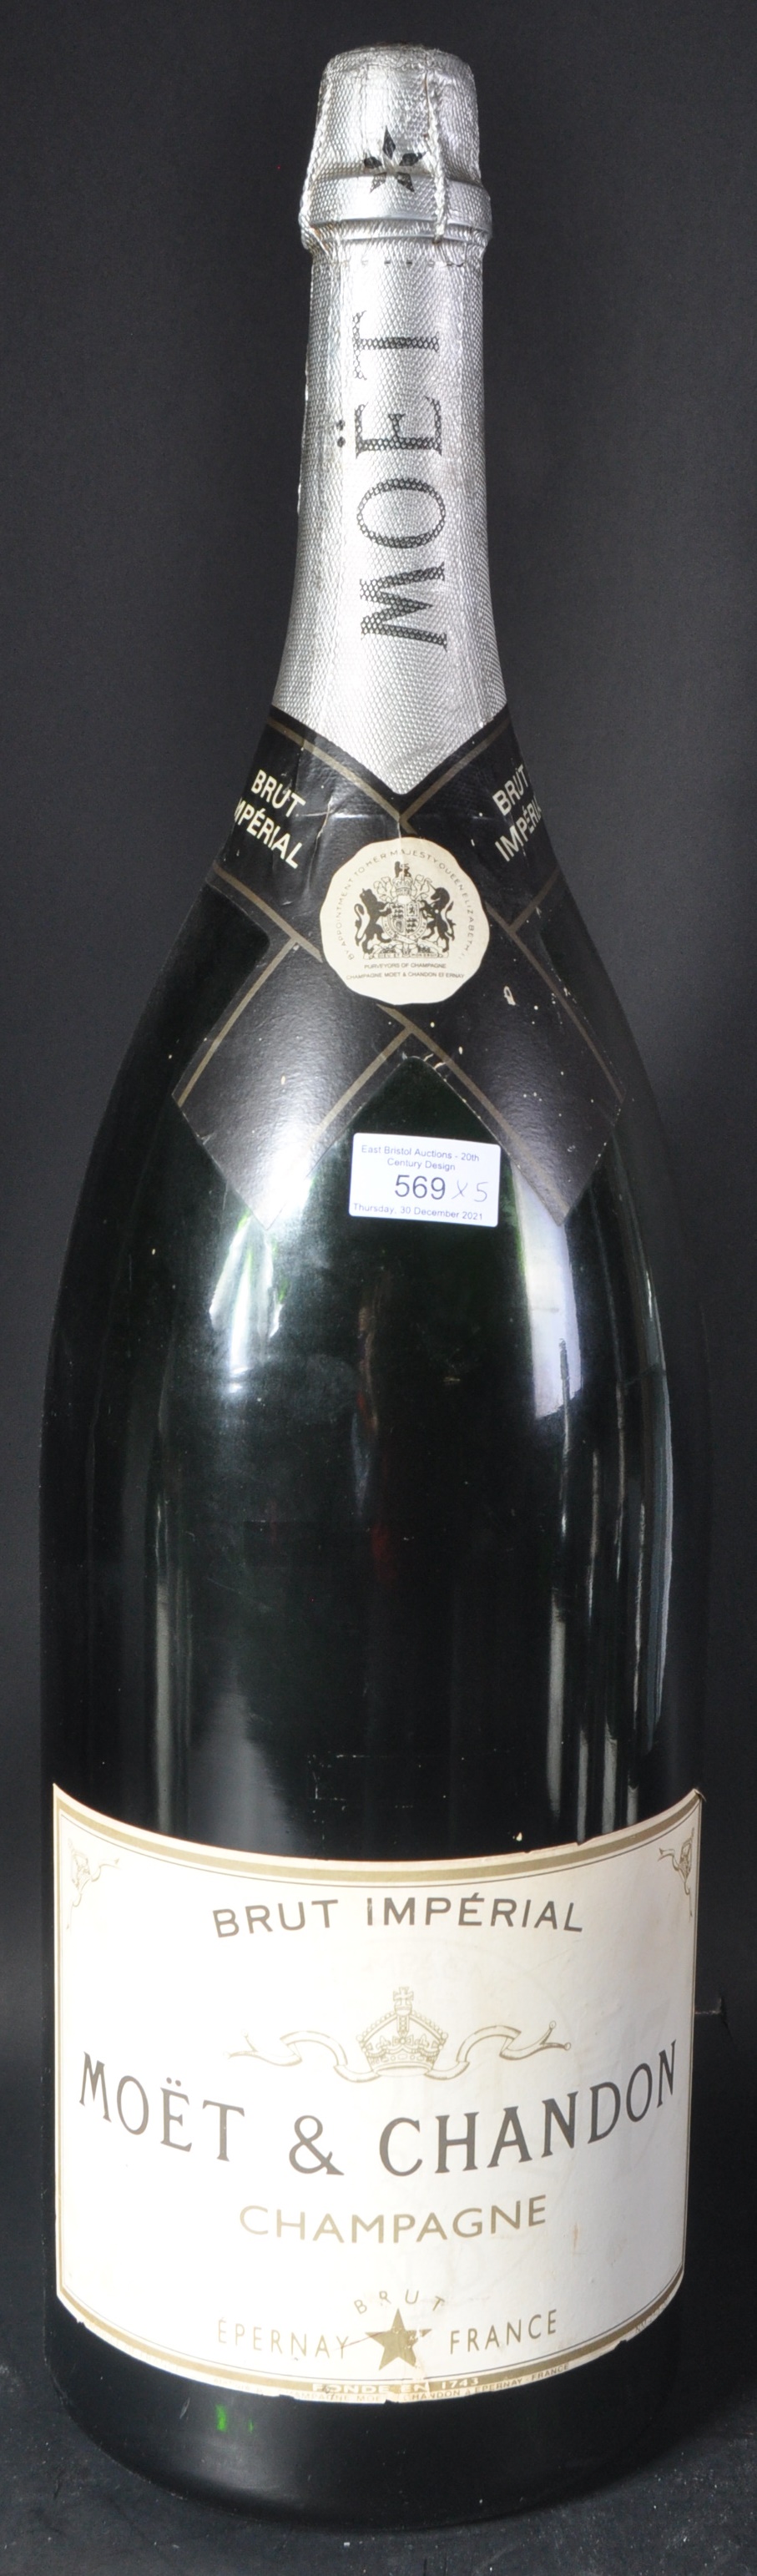 COLLECTION OF MOET CHAMPAGNE DISPLAY BOTTLES - Image 5 of 7